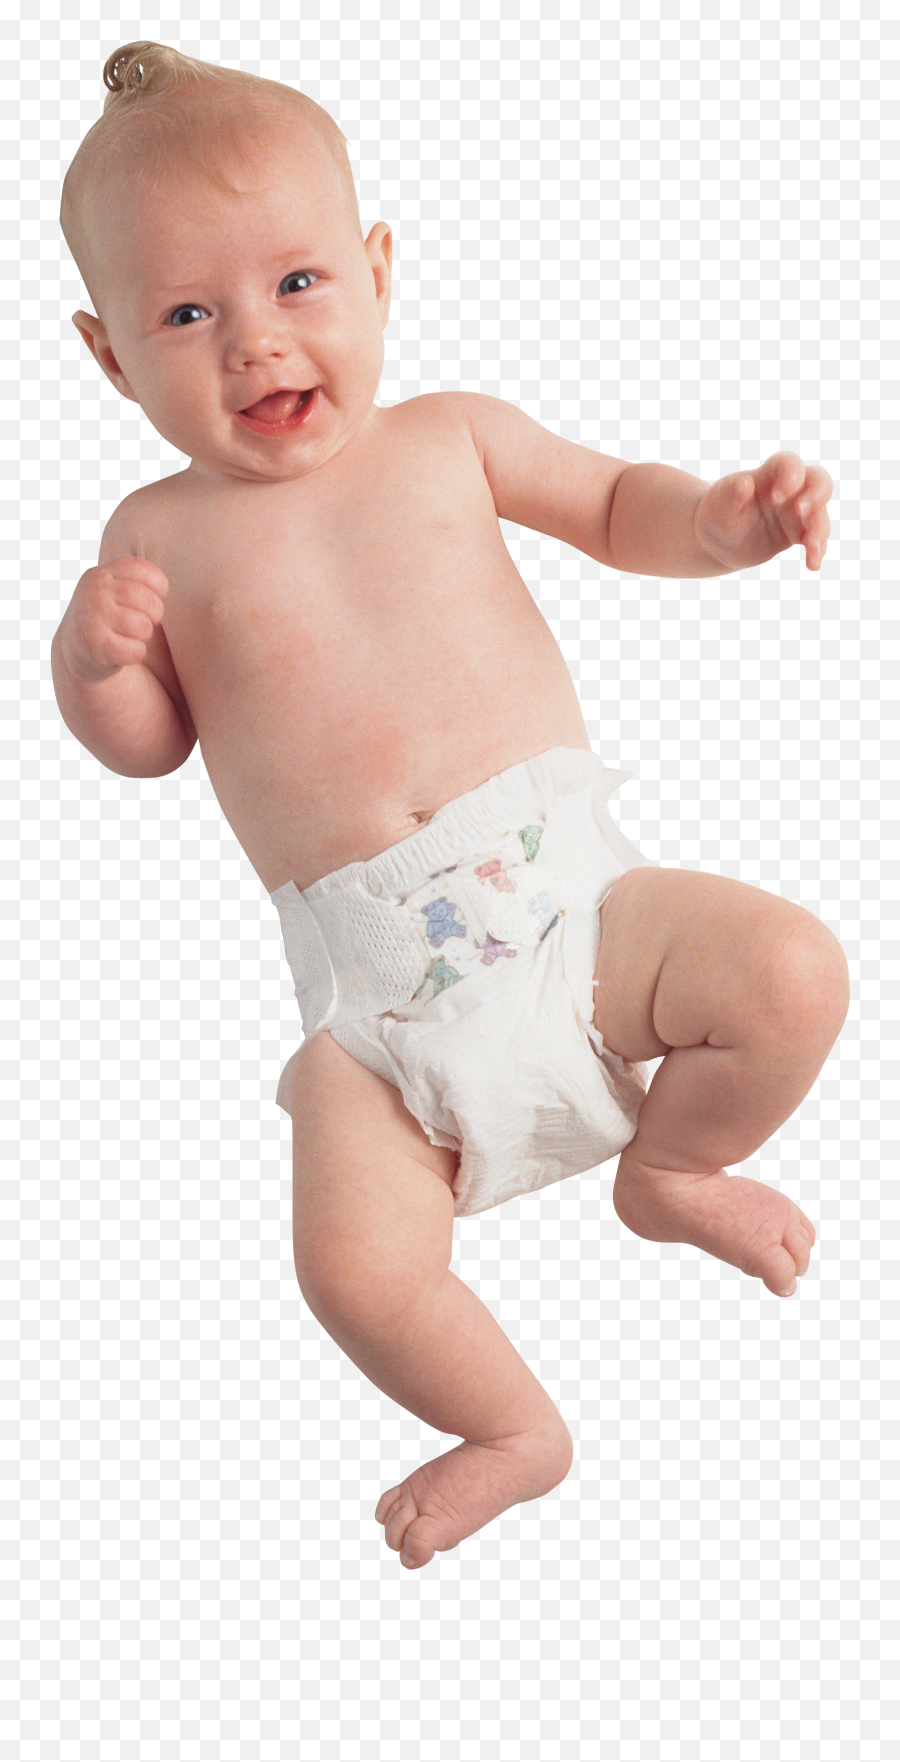 Baby Child Png - Baby In Diaper Hd Emoji,Baby Png